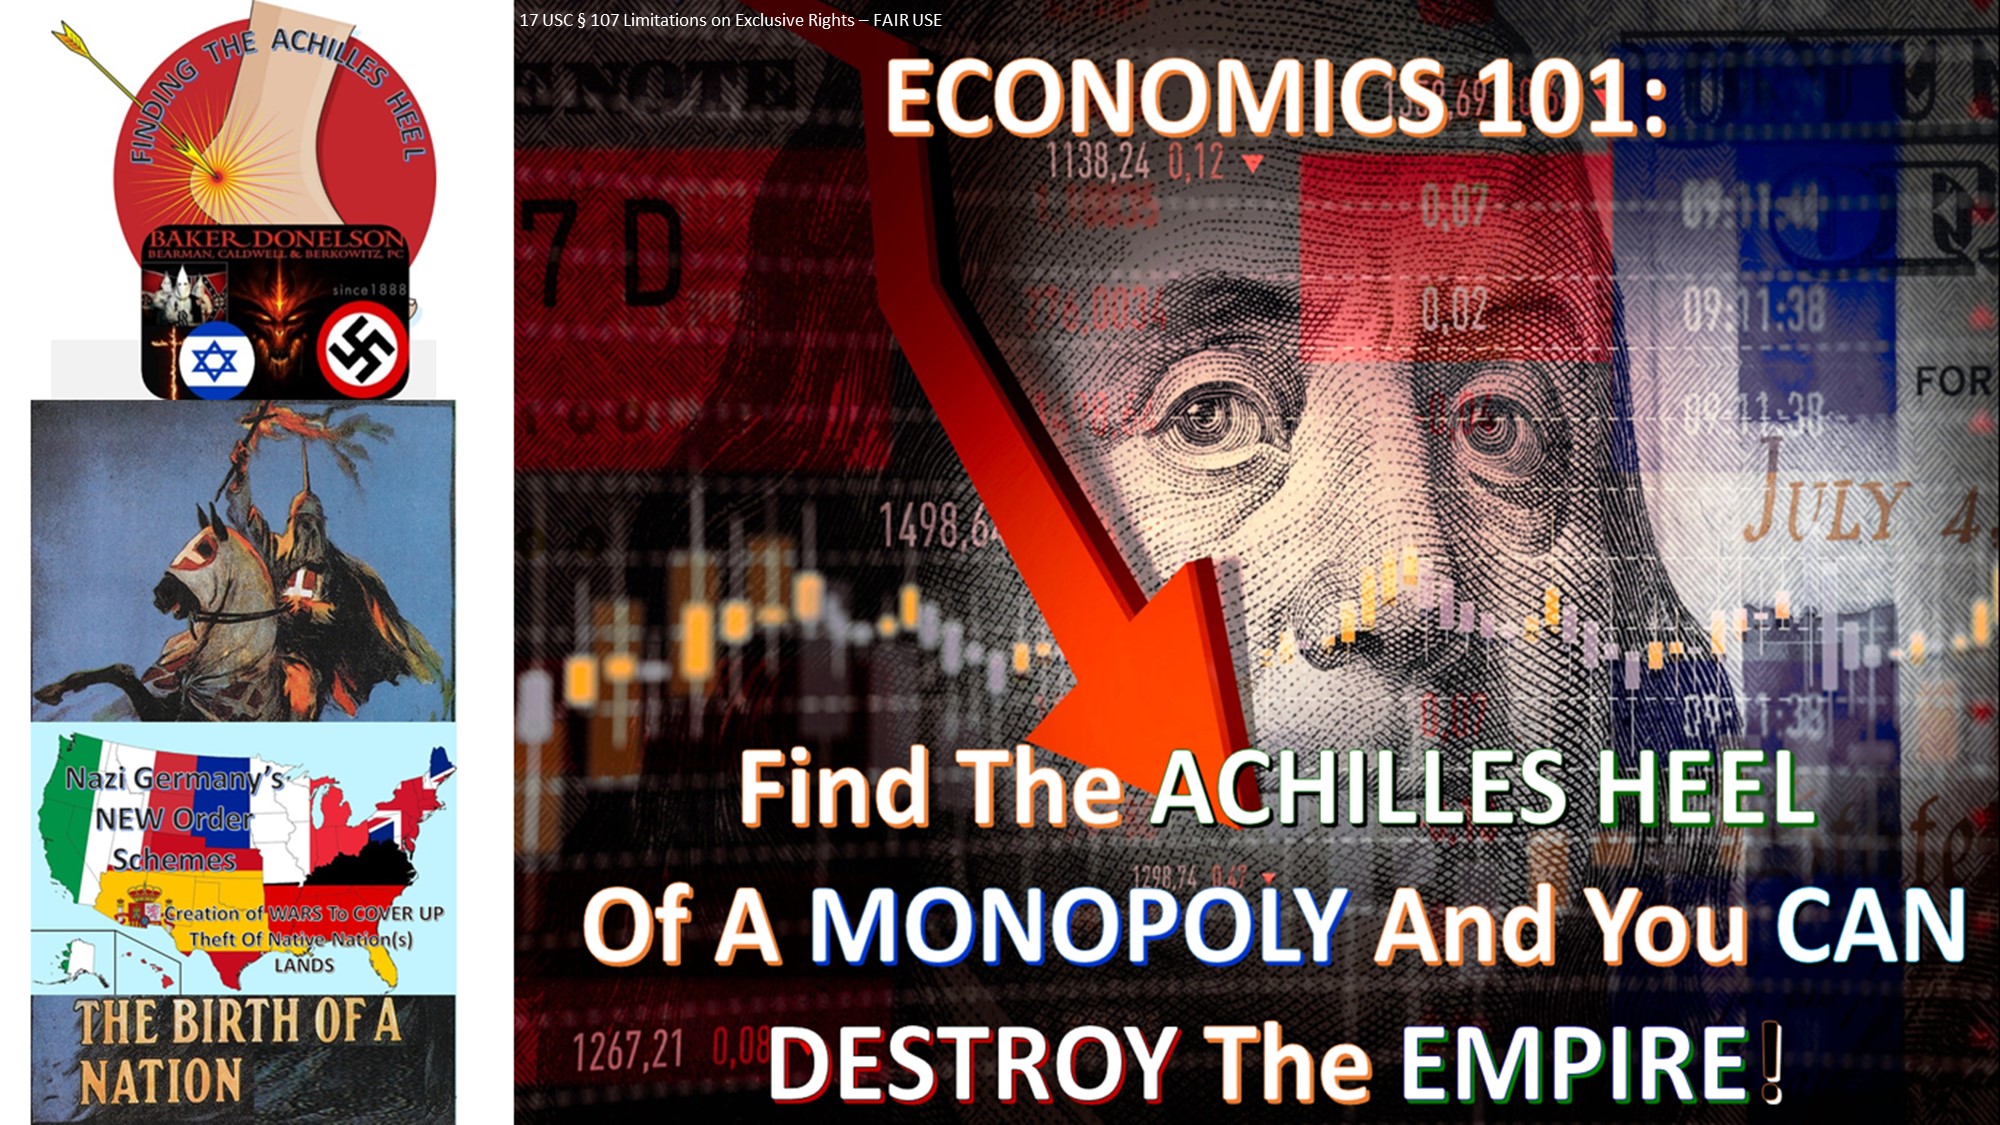 ECONOMICS 101 Find The Achilles Heel Of A Monopoly And You CAN Destroy The EMPIRE